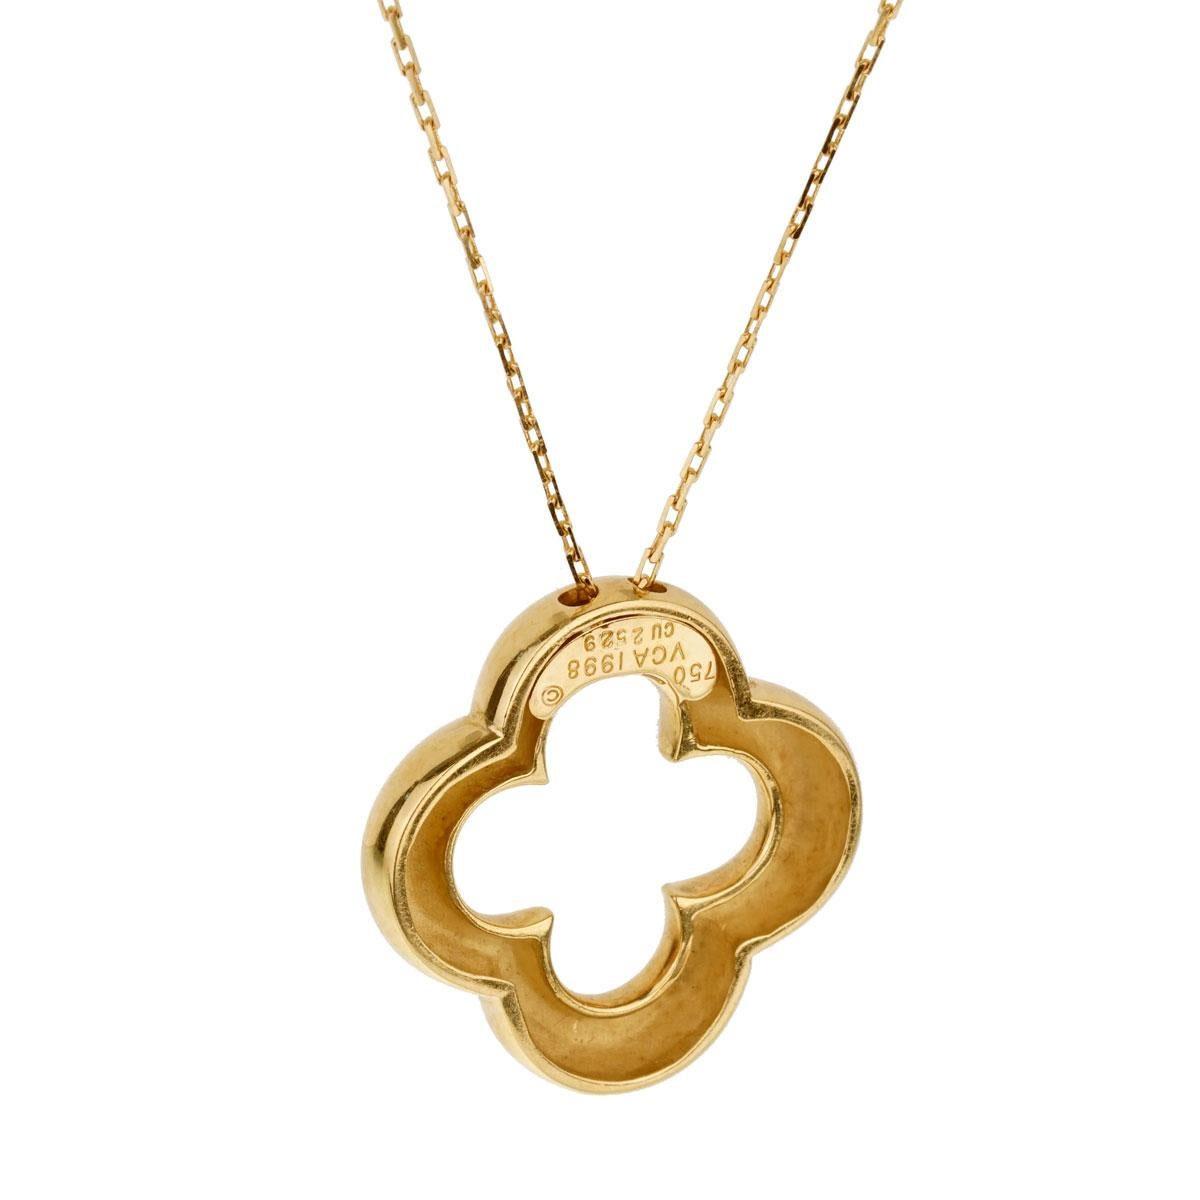 Circa 1990's, this vintage alhambra gold necklace by Van Cleef & Arpels is both simple and elegant. The classic pendant necklace, in an open Alhambra design, is finely crafted in high polished 18kt yellow gold with rounded, concave edges.

Length: